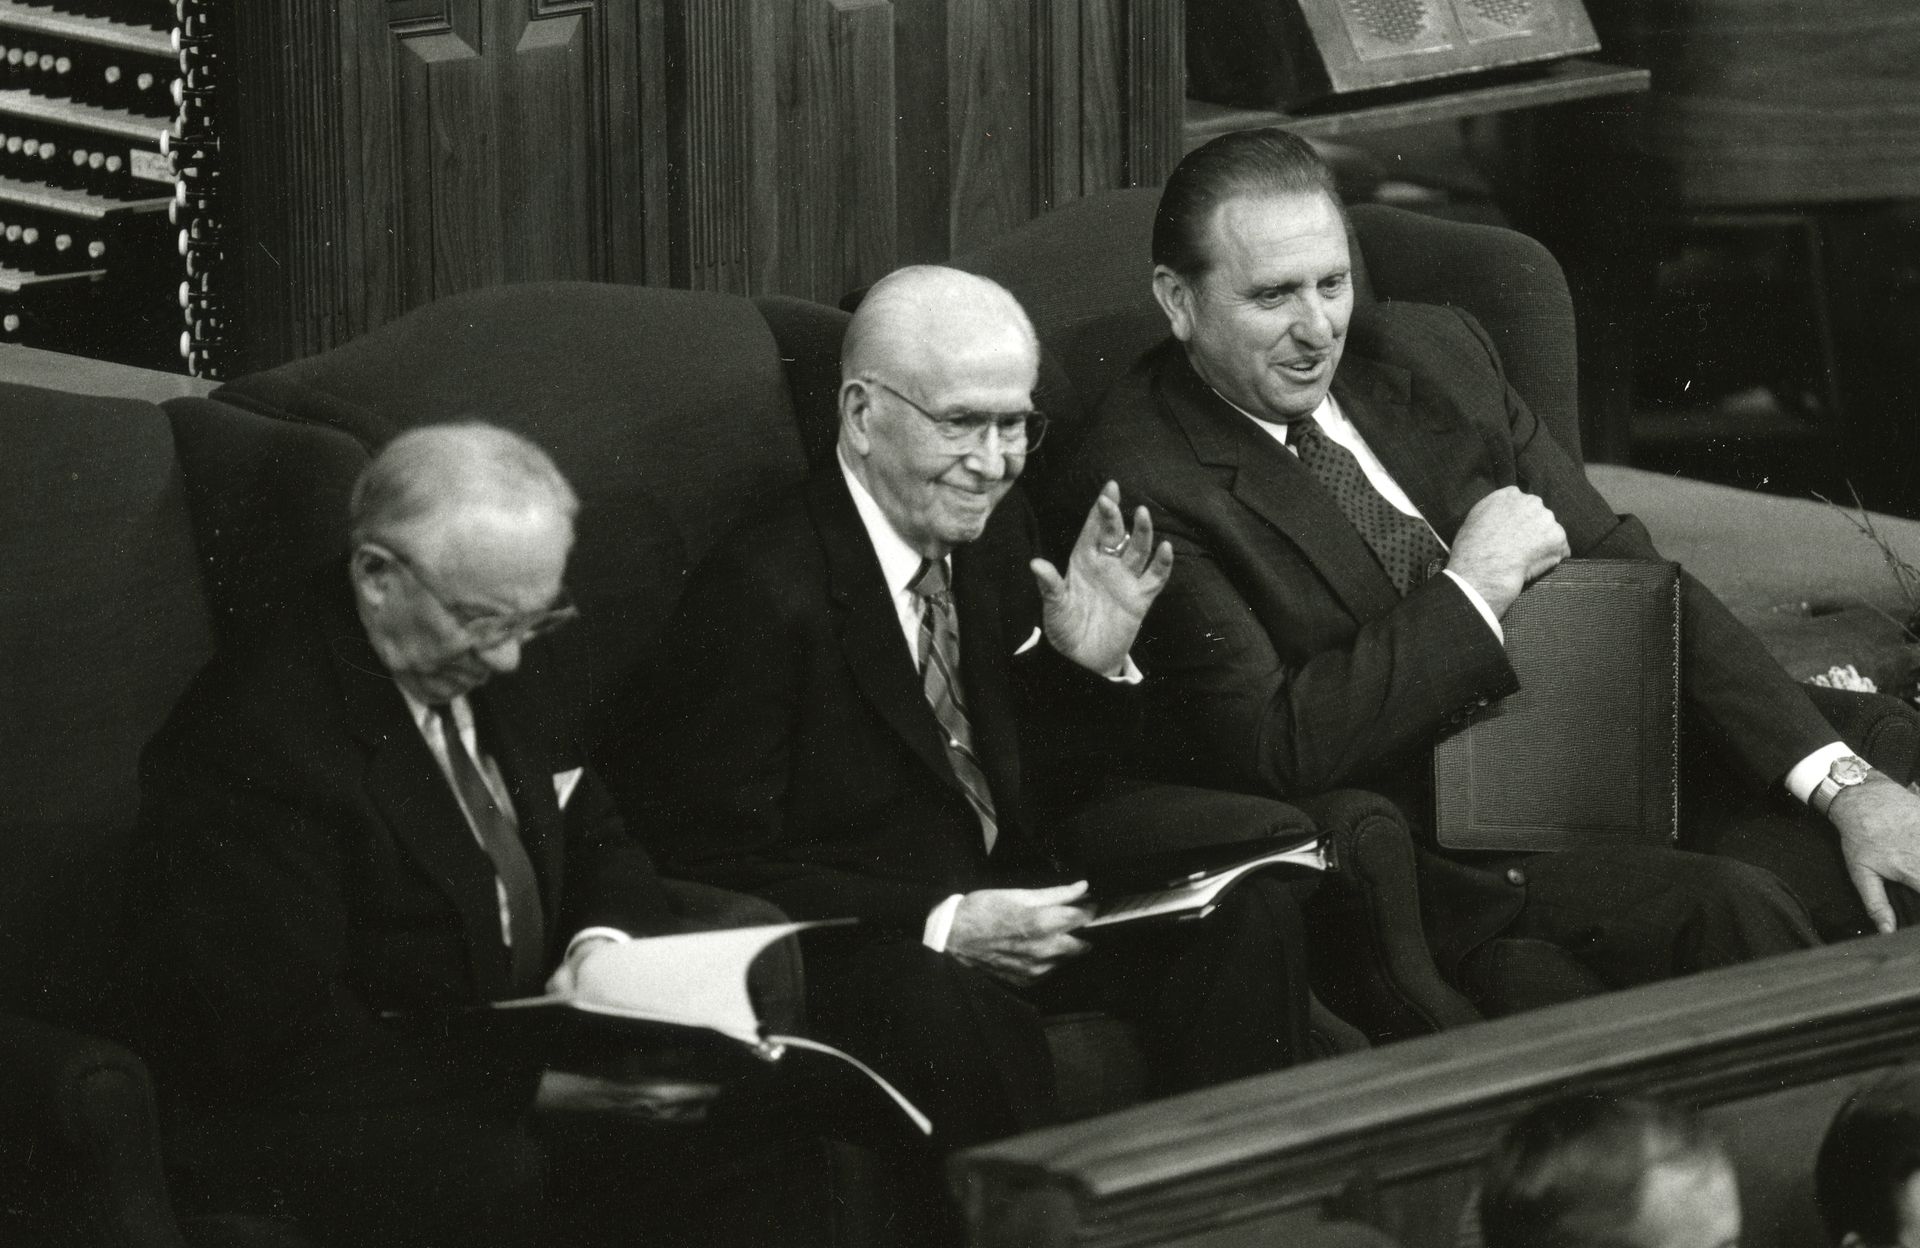 President Benson sitting between his counselors and waving to the audience in the Tabernacle.